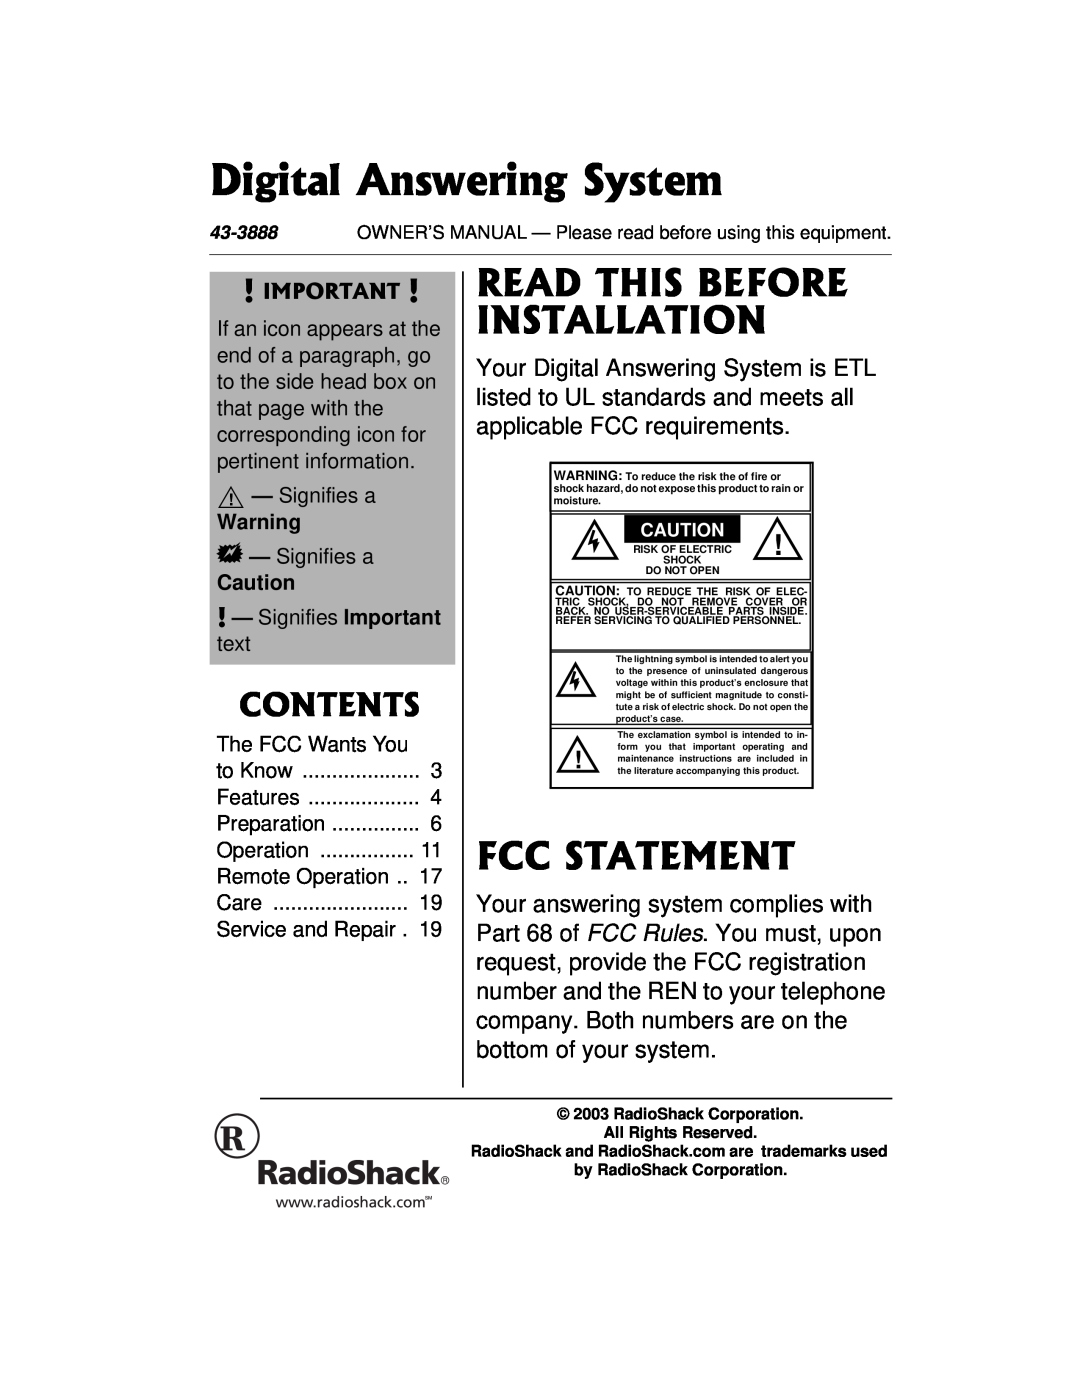 Radio Shack 43-3888 owner manual Read This Before Installation, Fcc Statement, Contents, Digital Answering System 